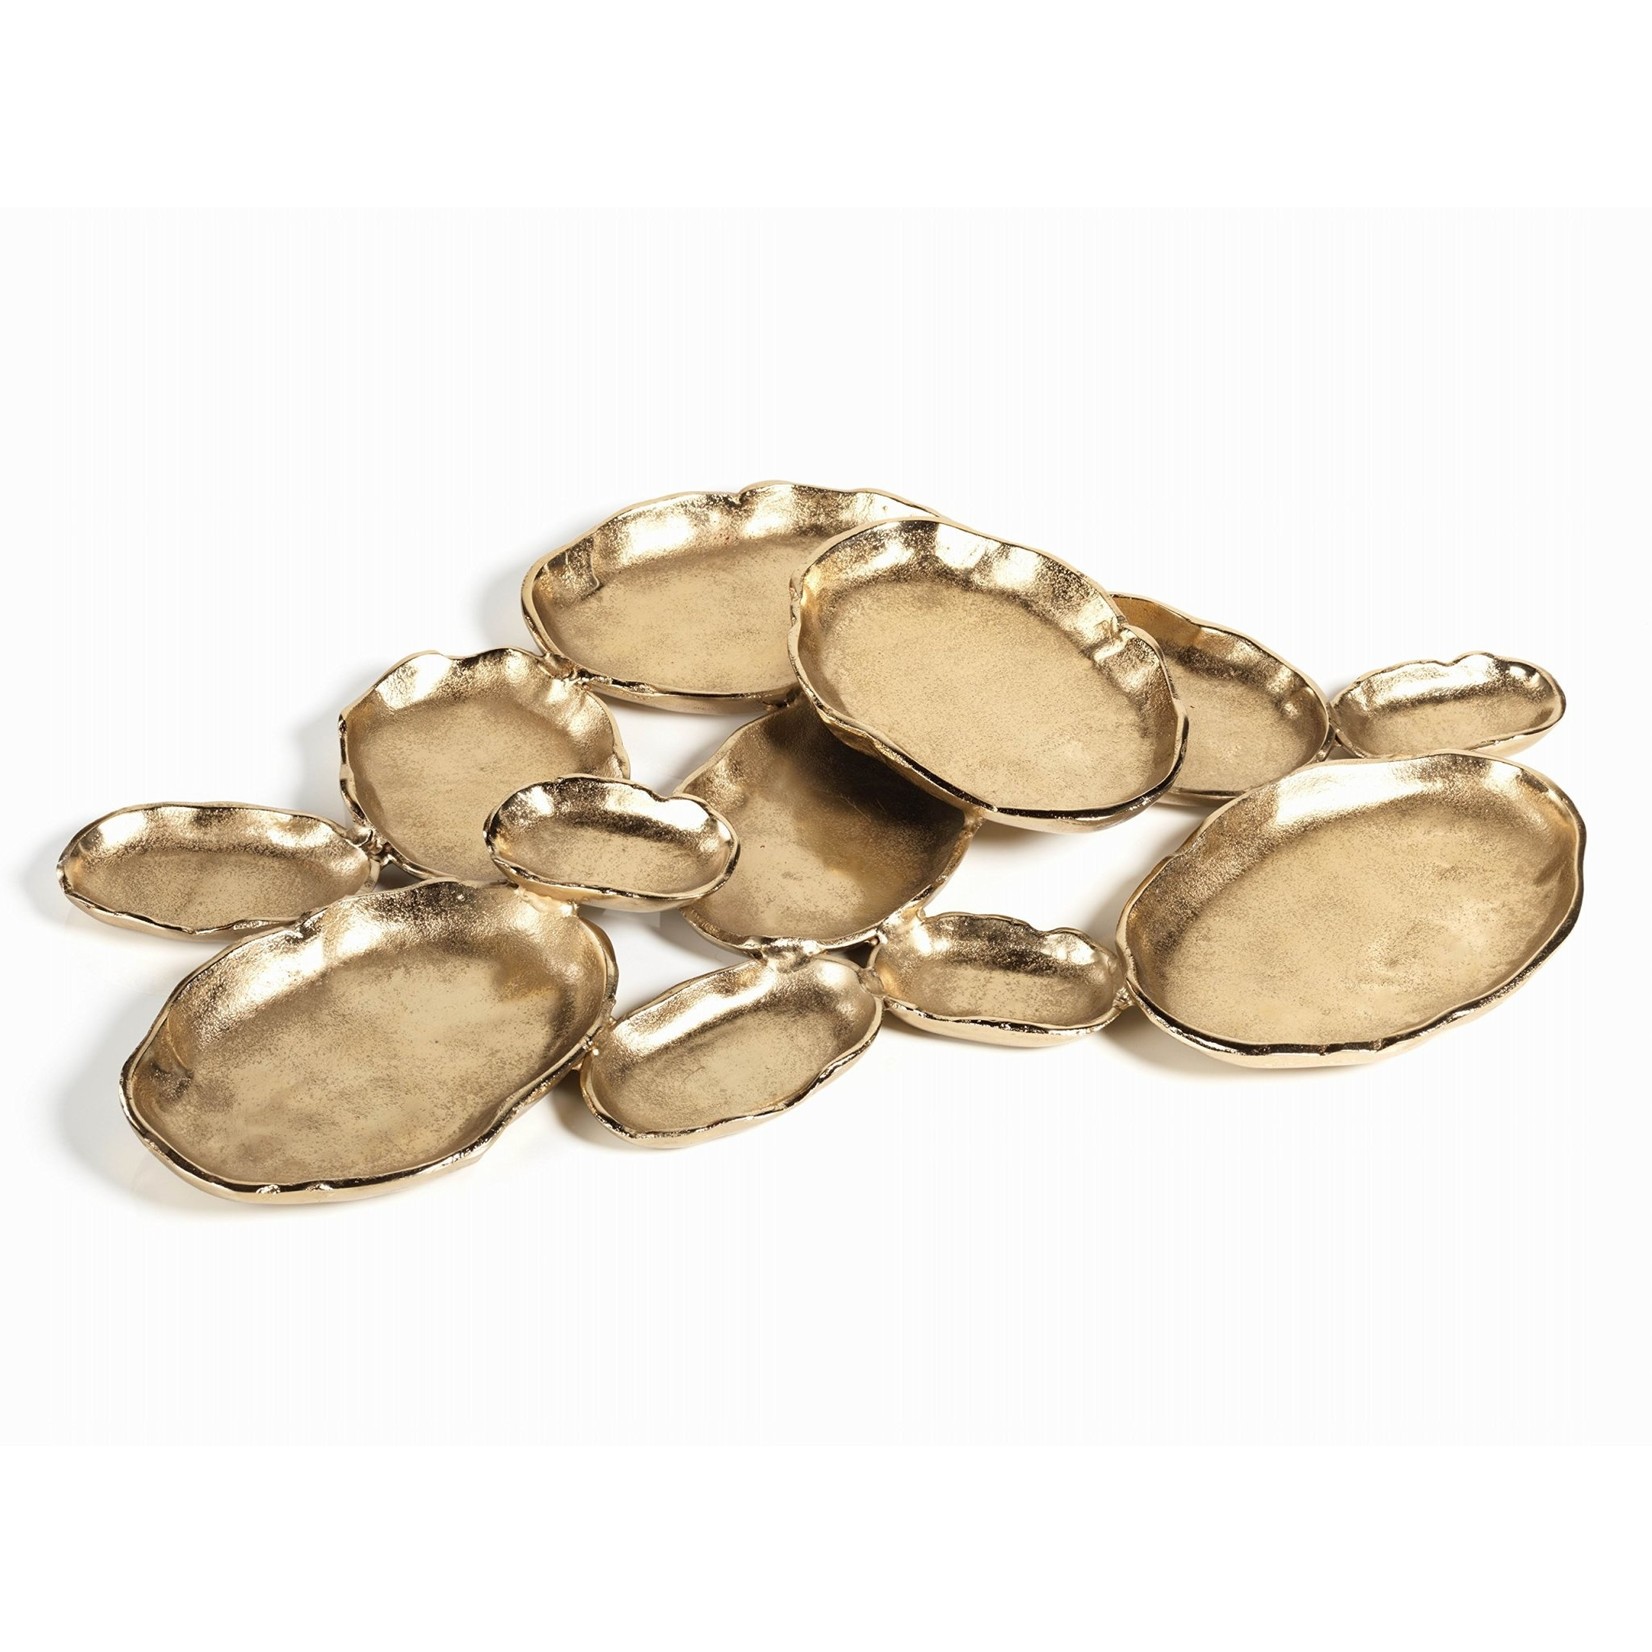 OVAL GOLD SERVING 12 DISH